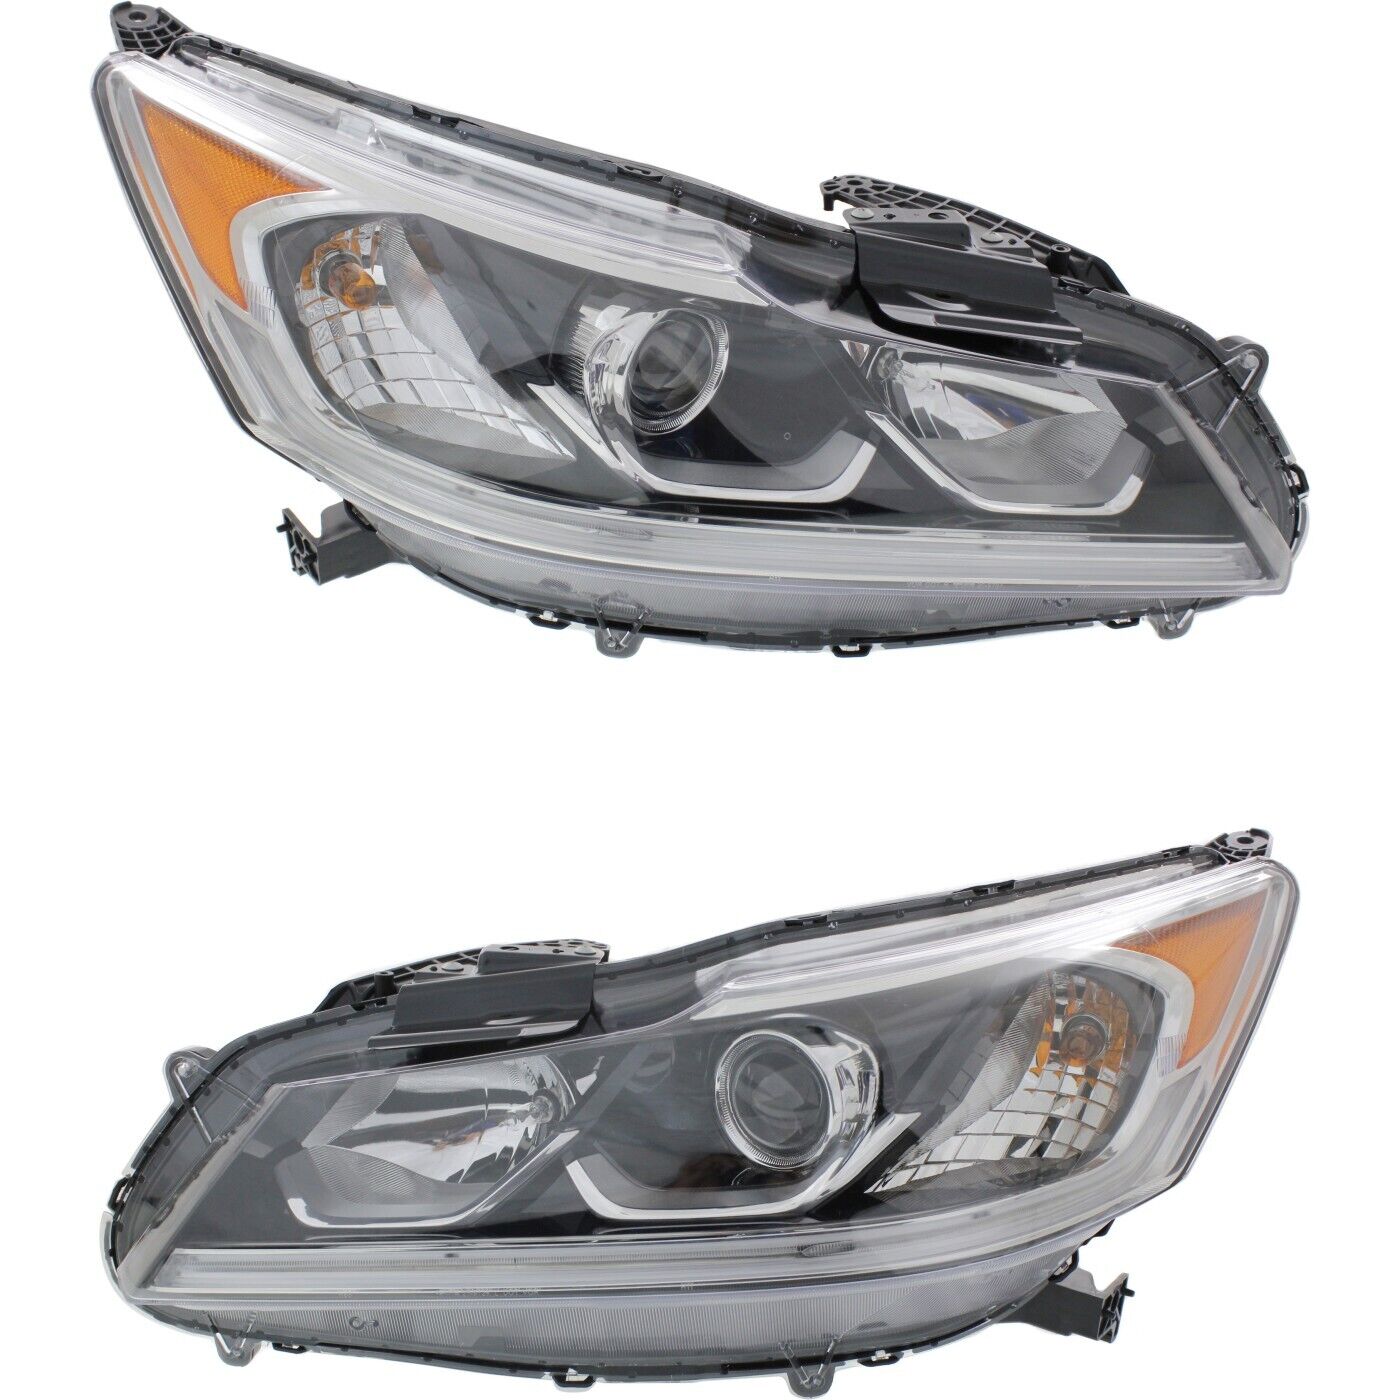 Headlight Assembly Set For 2016 2017 Honda Accord Sedan Left and Right With Bulb